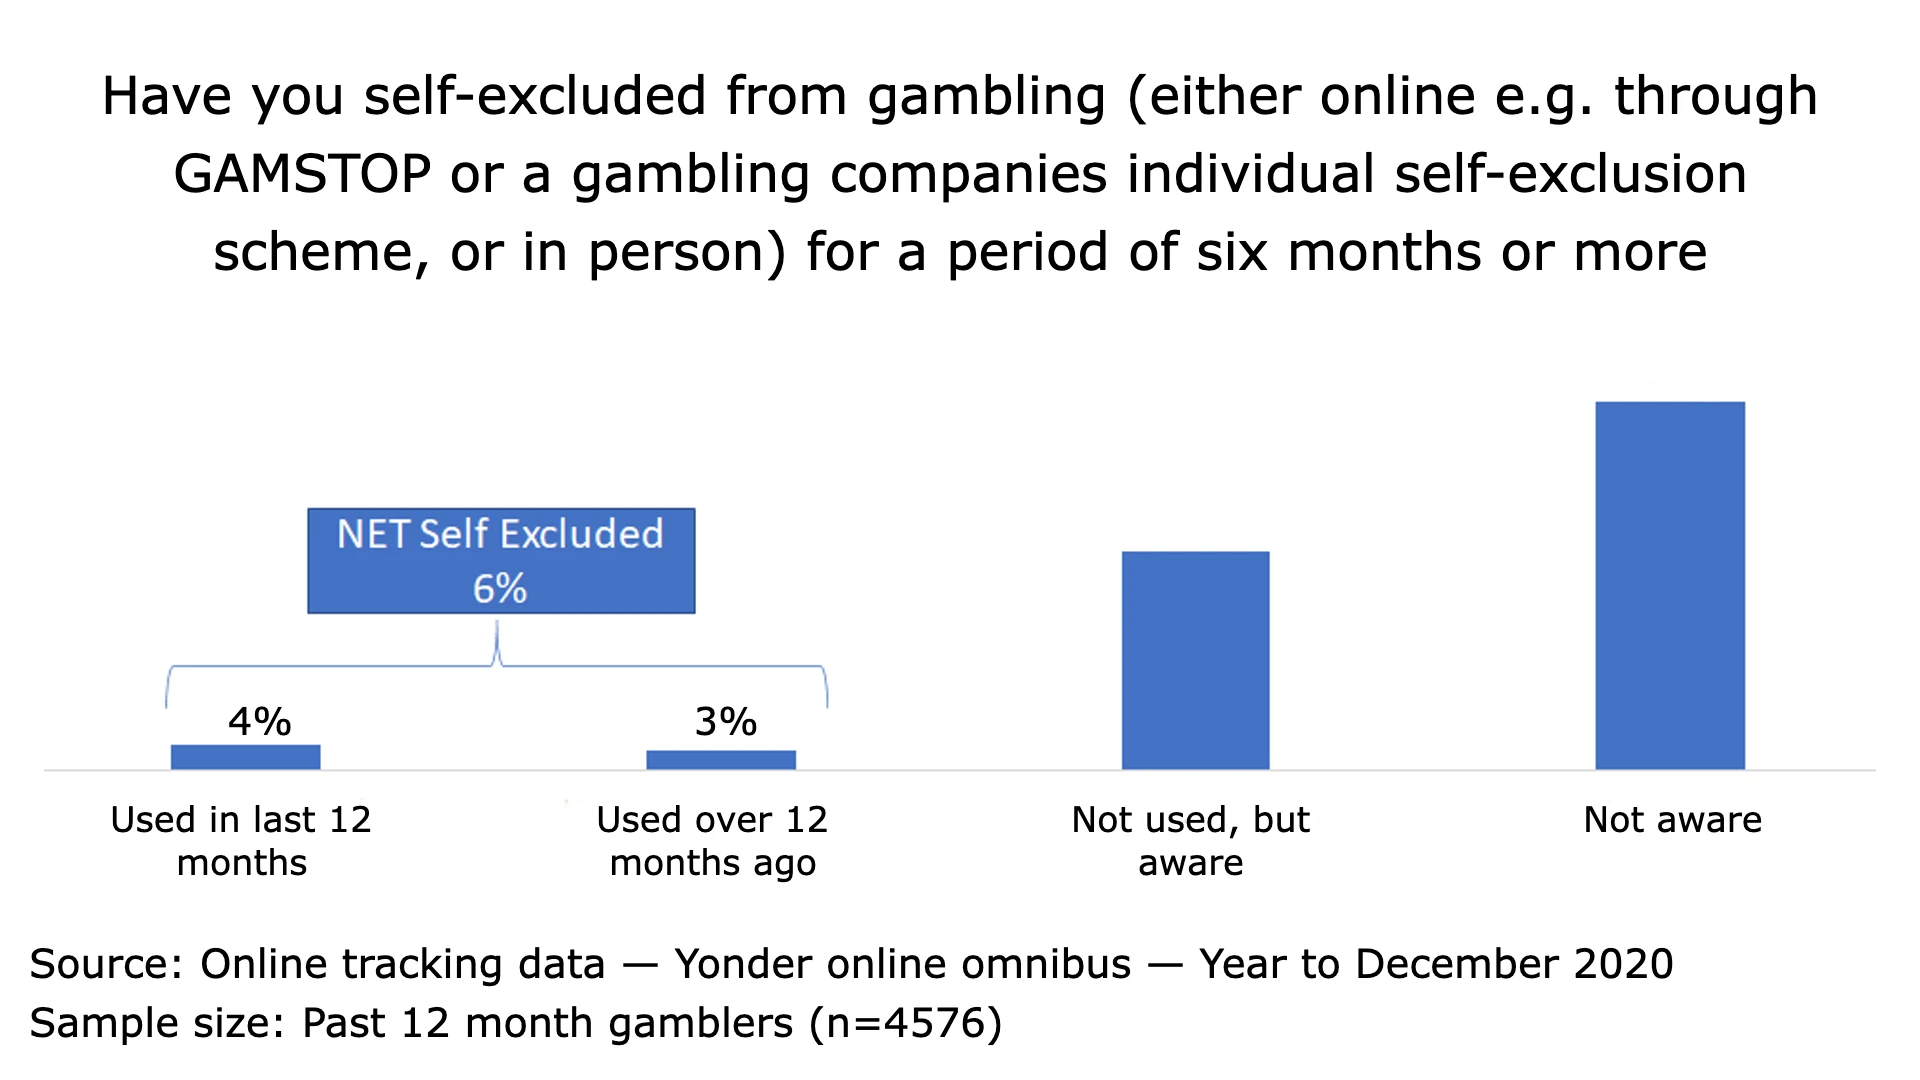 Level of voluntary self-exclusion from gambling activities.